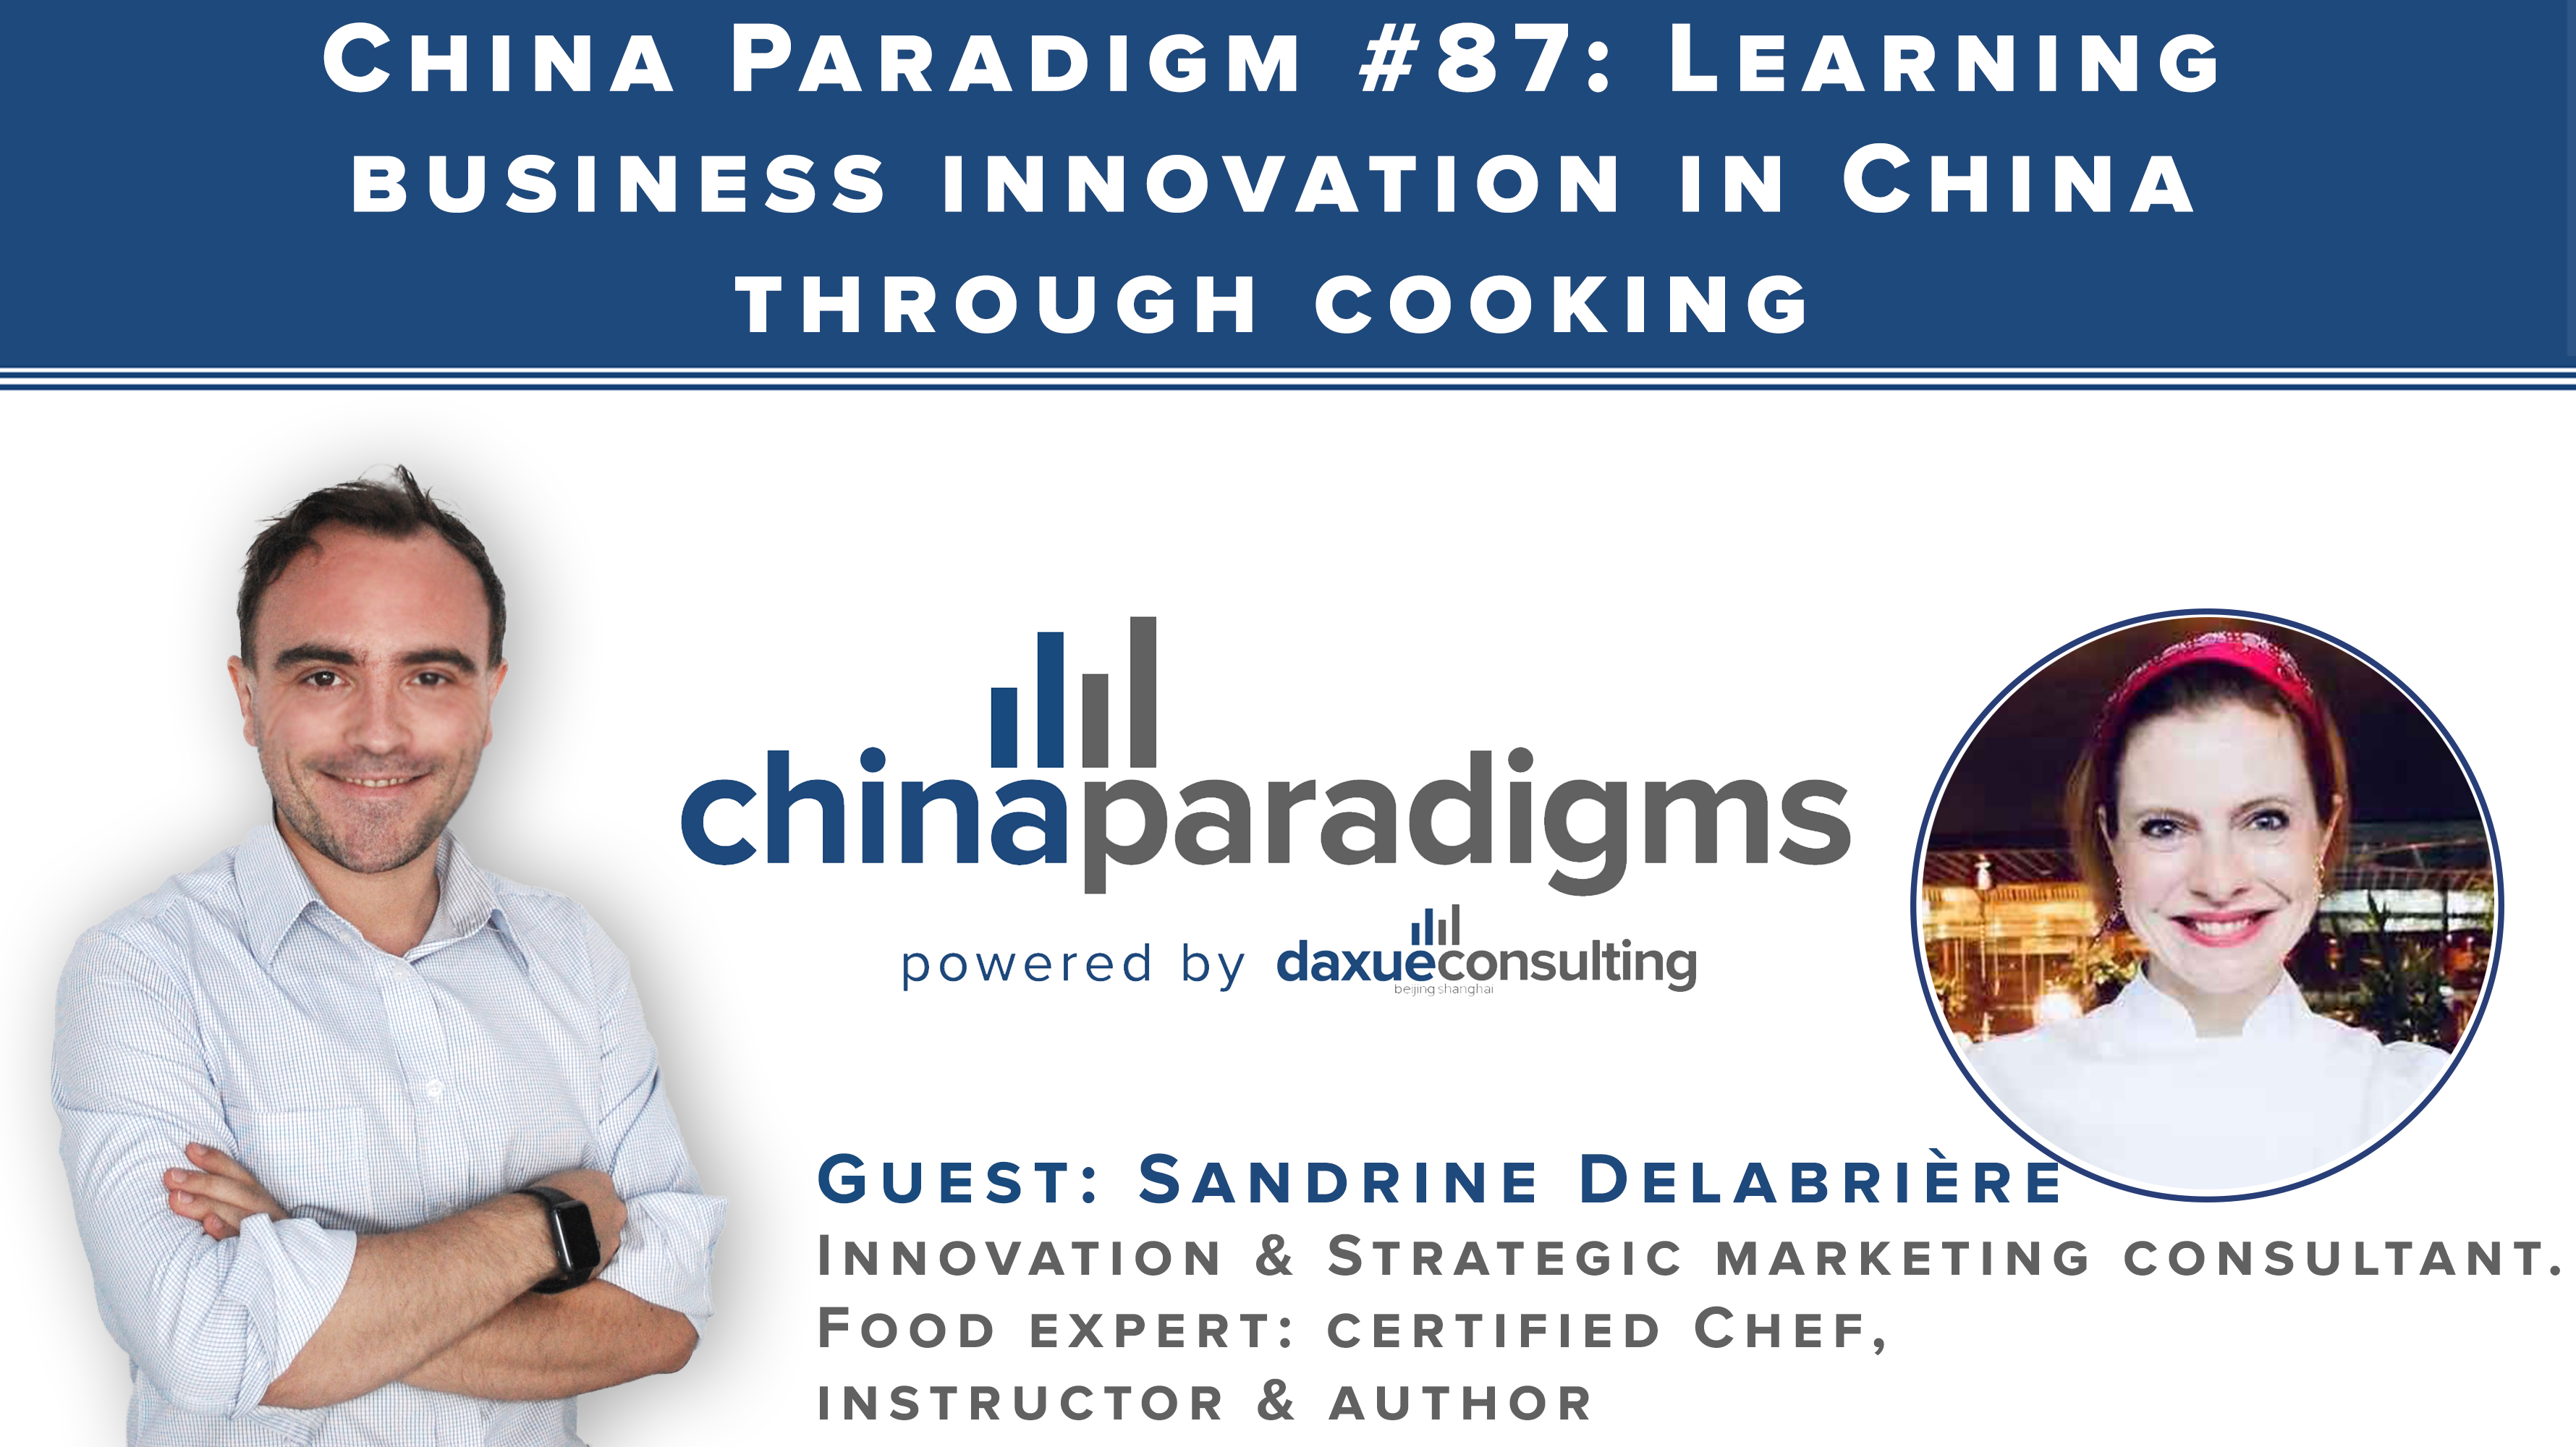 China Paradigm 87: Learning business innovation in China through cooking